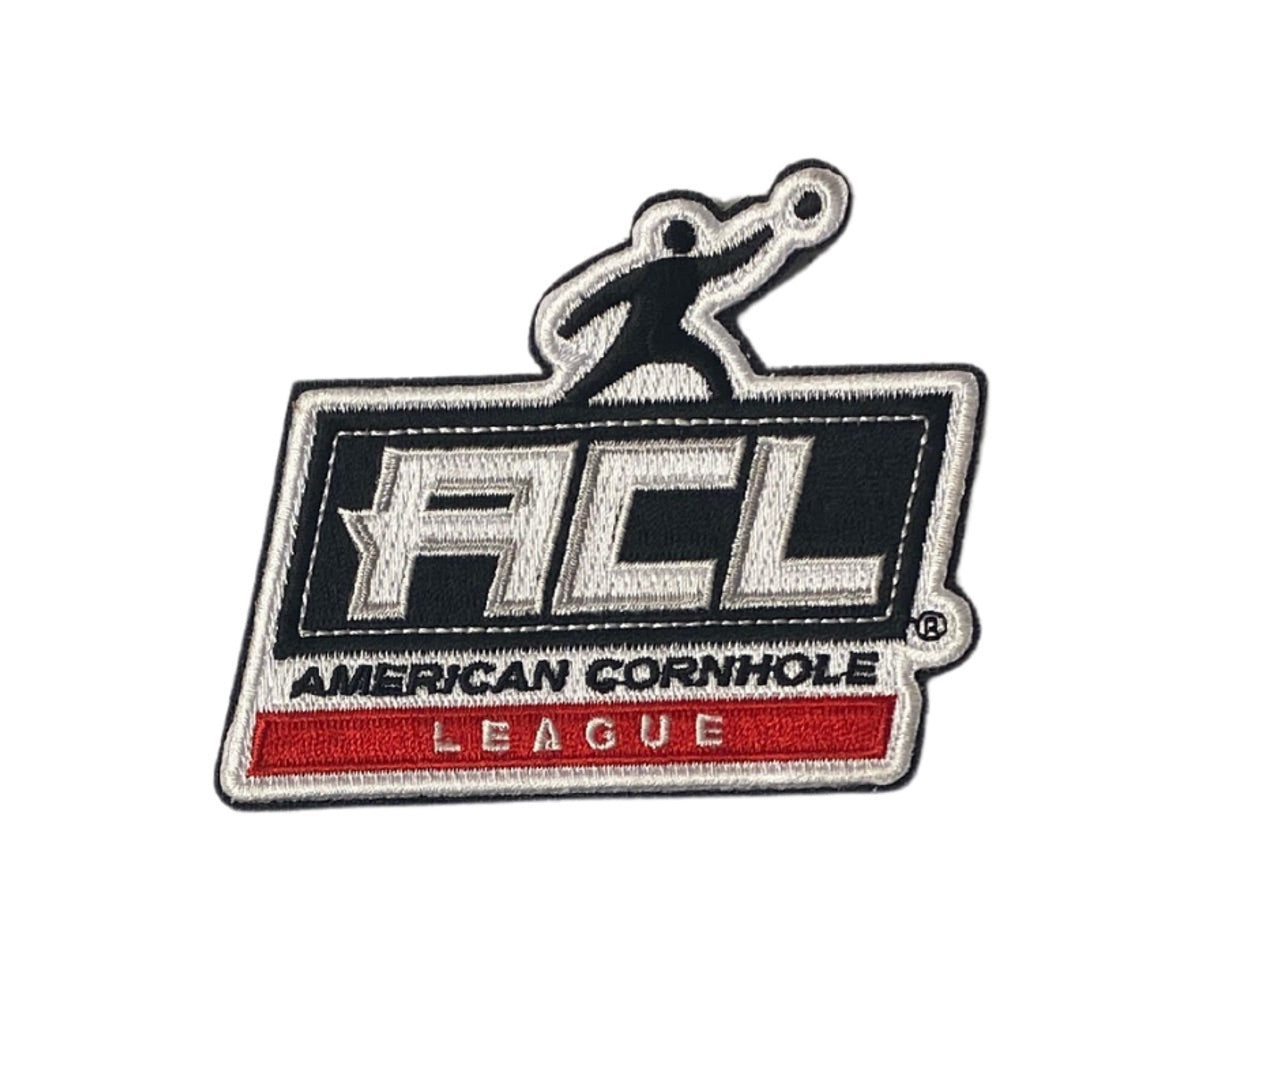 What is the American Cornhole League (ACL)